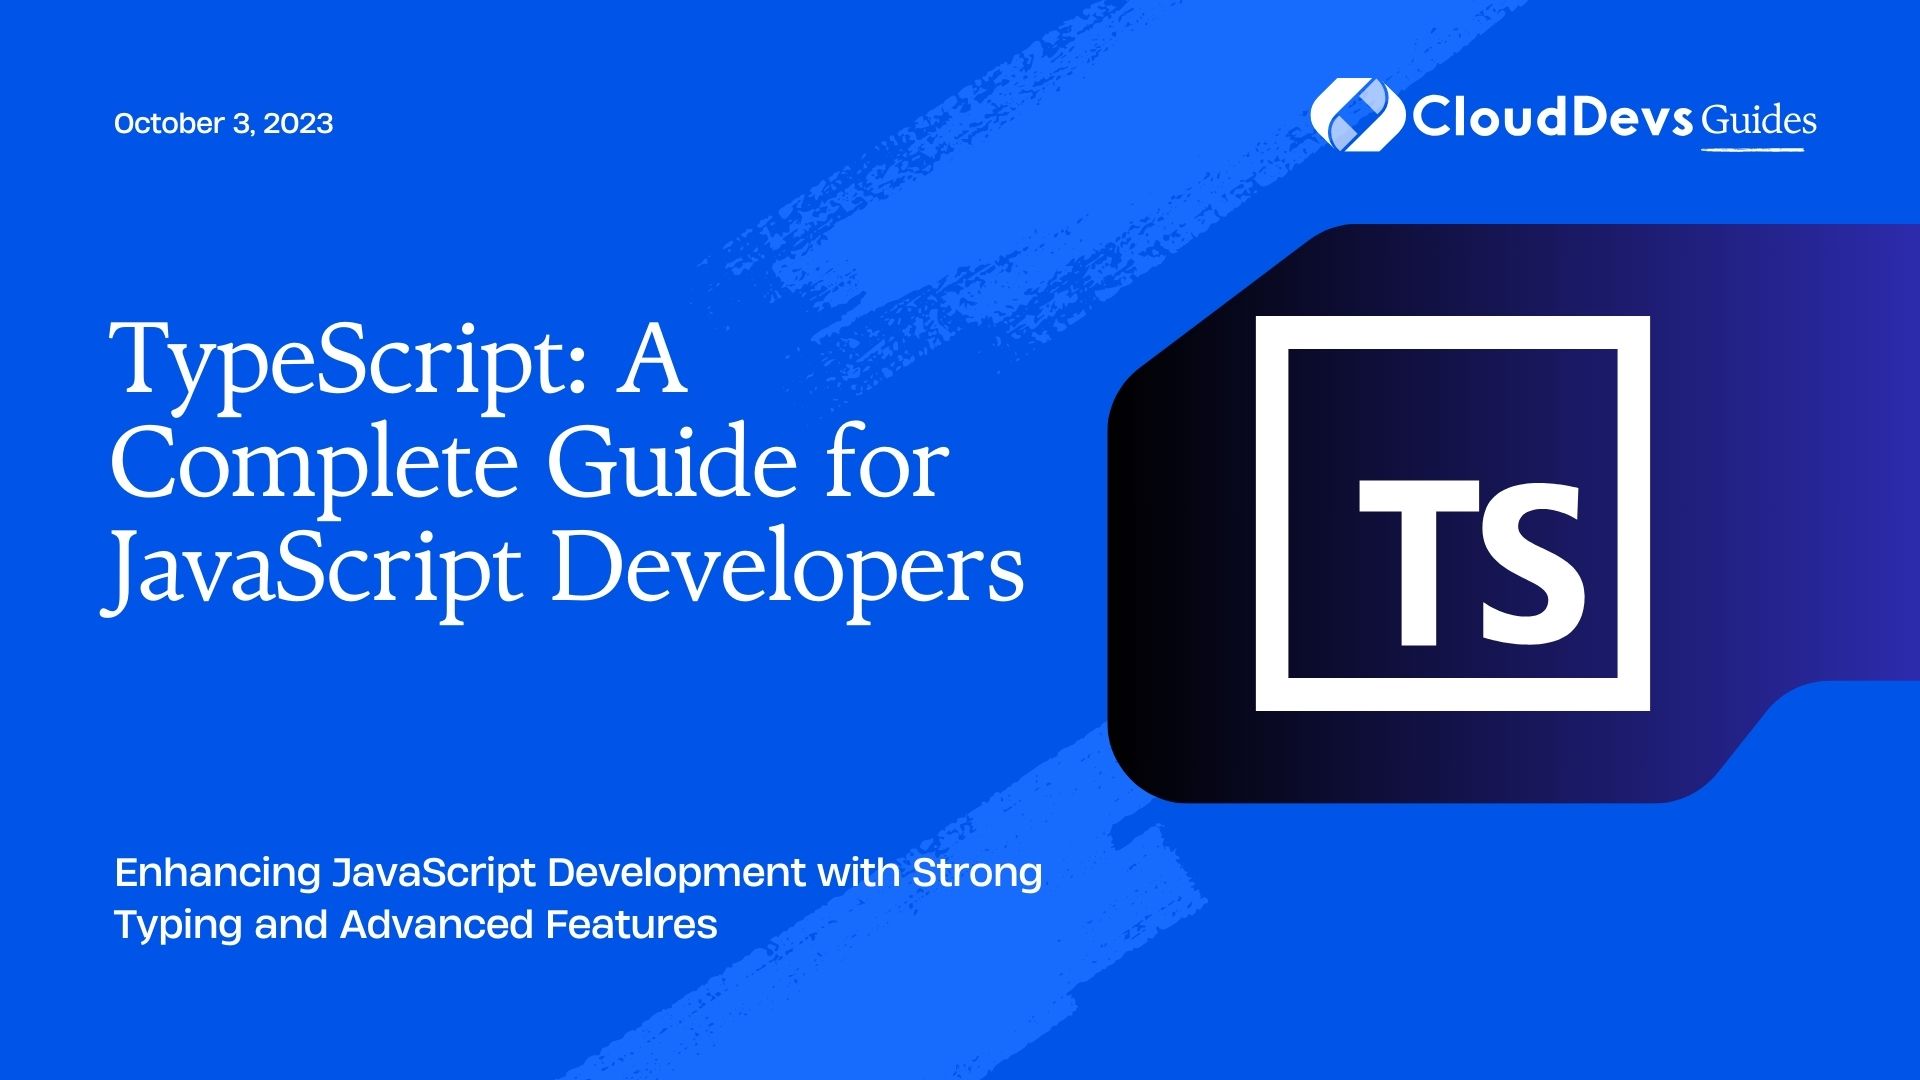 TypeScript: A Complete Guide for JavaScript Developers